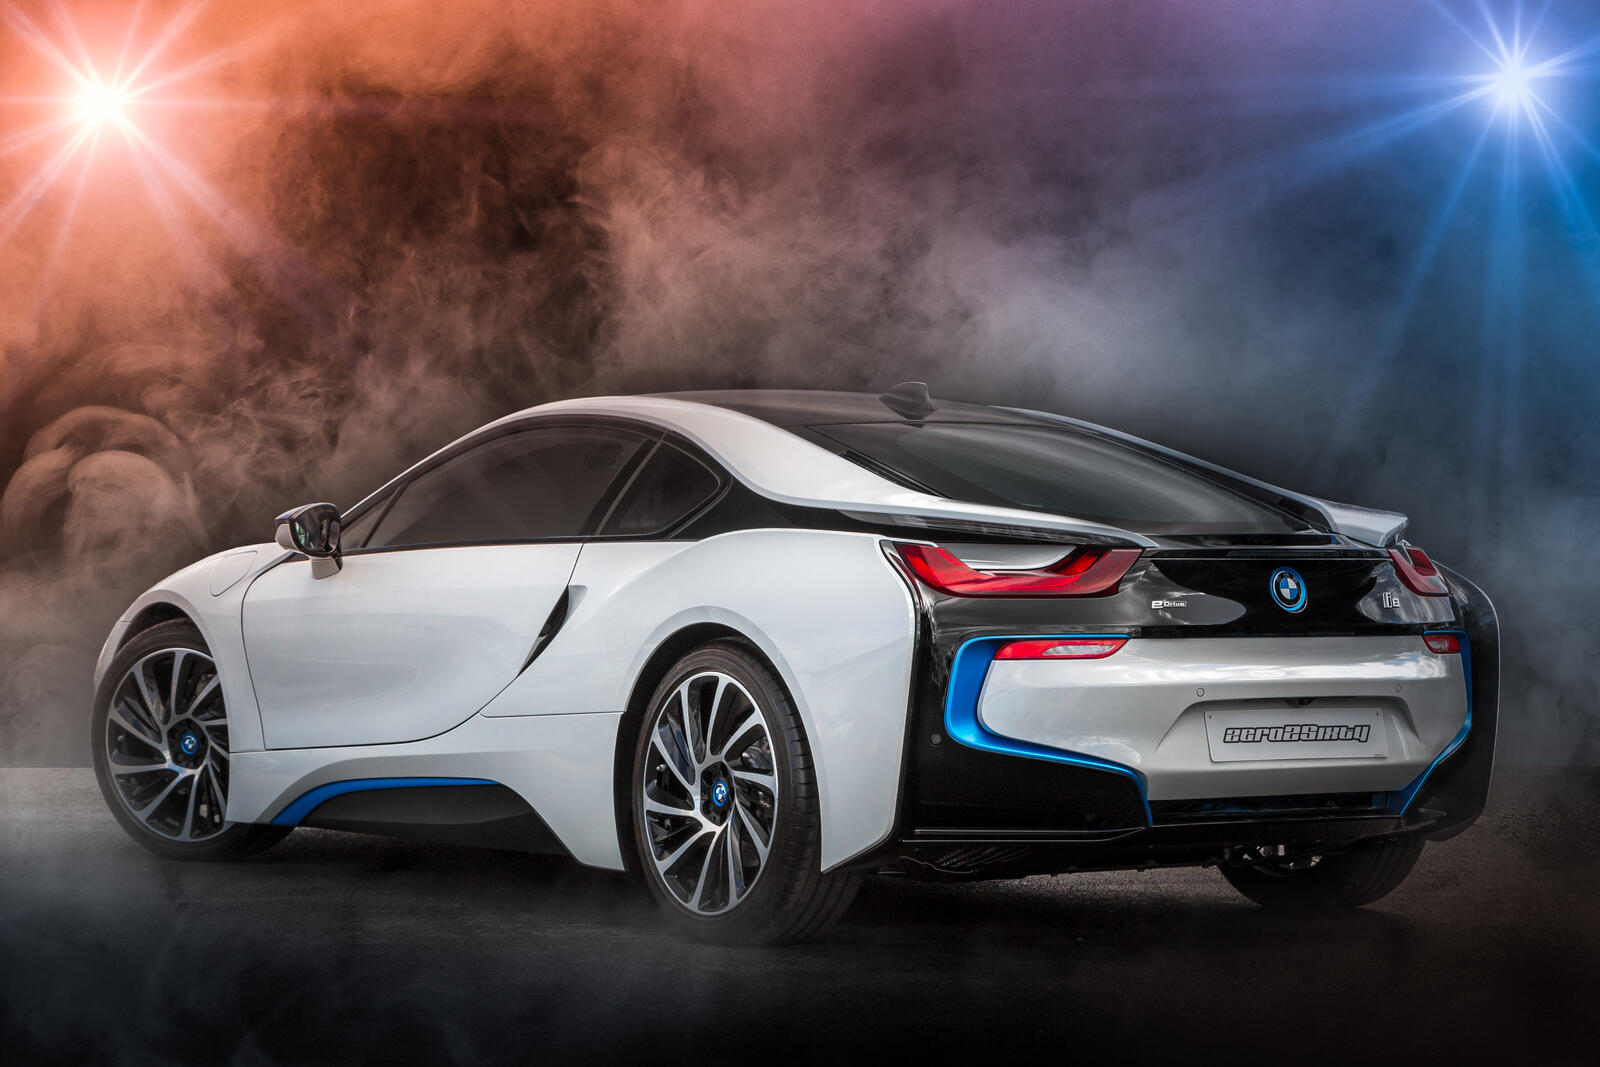 Wallpapers BMW i8 car cars on the desktop